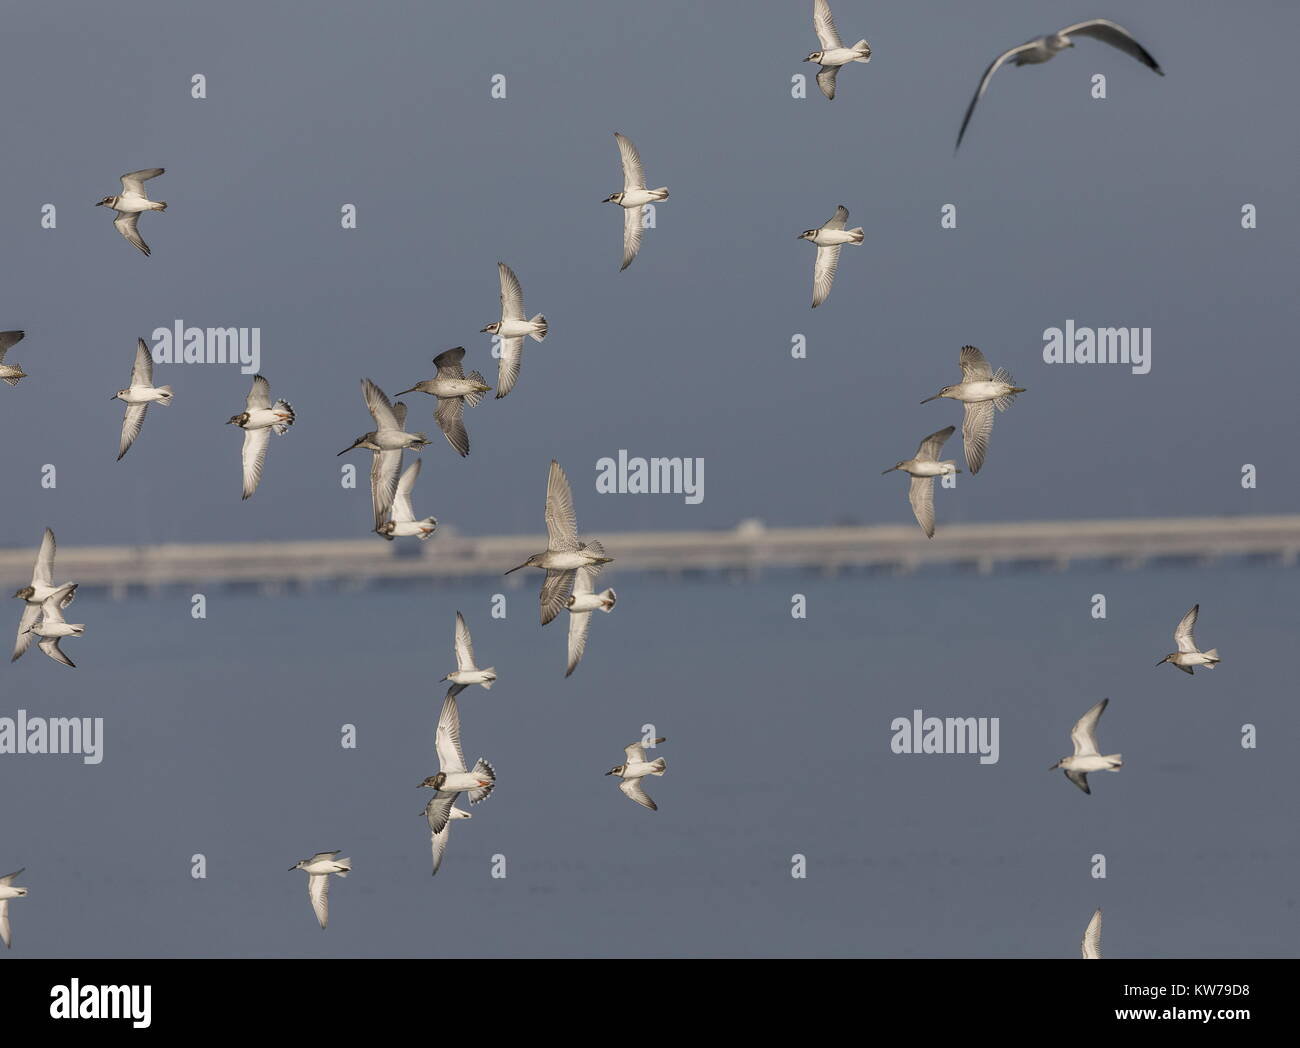 Mixed wader or shorebird flock in flight, including Semipalmated Plover, Marbled Godwit, Ruddy Turnstone etc over Tampa Bay, Florida. Stock Photo